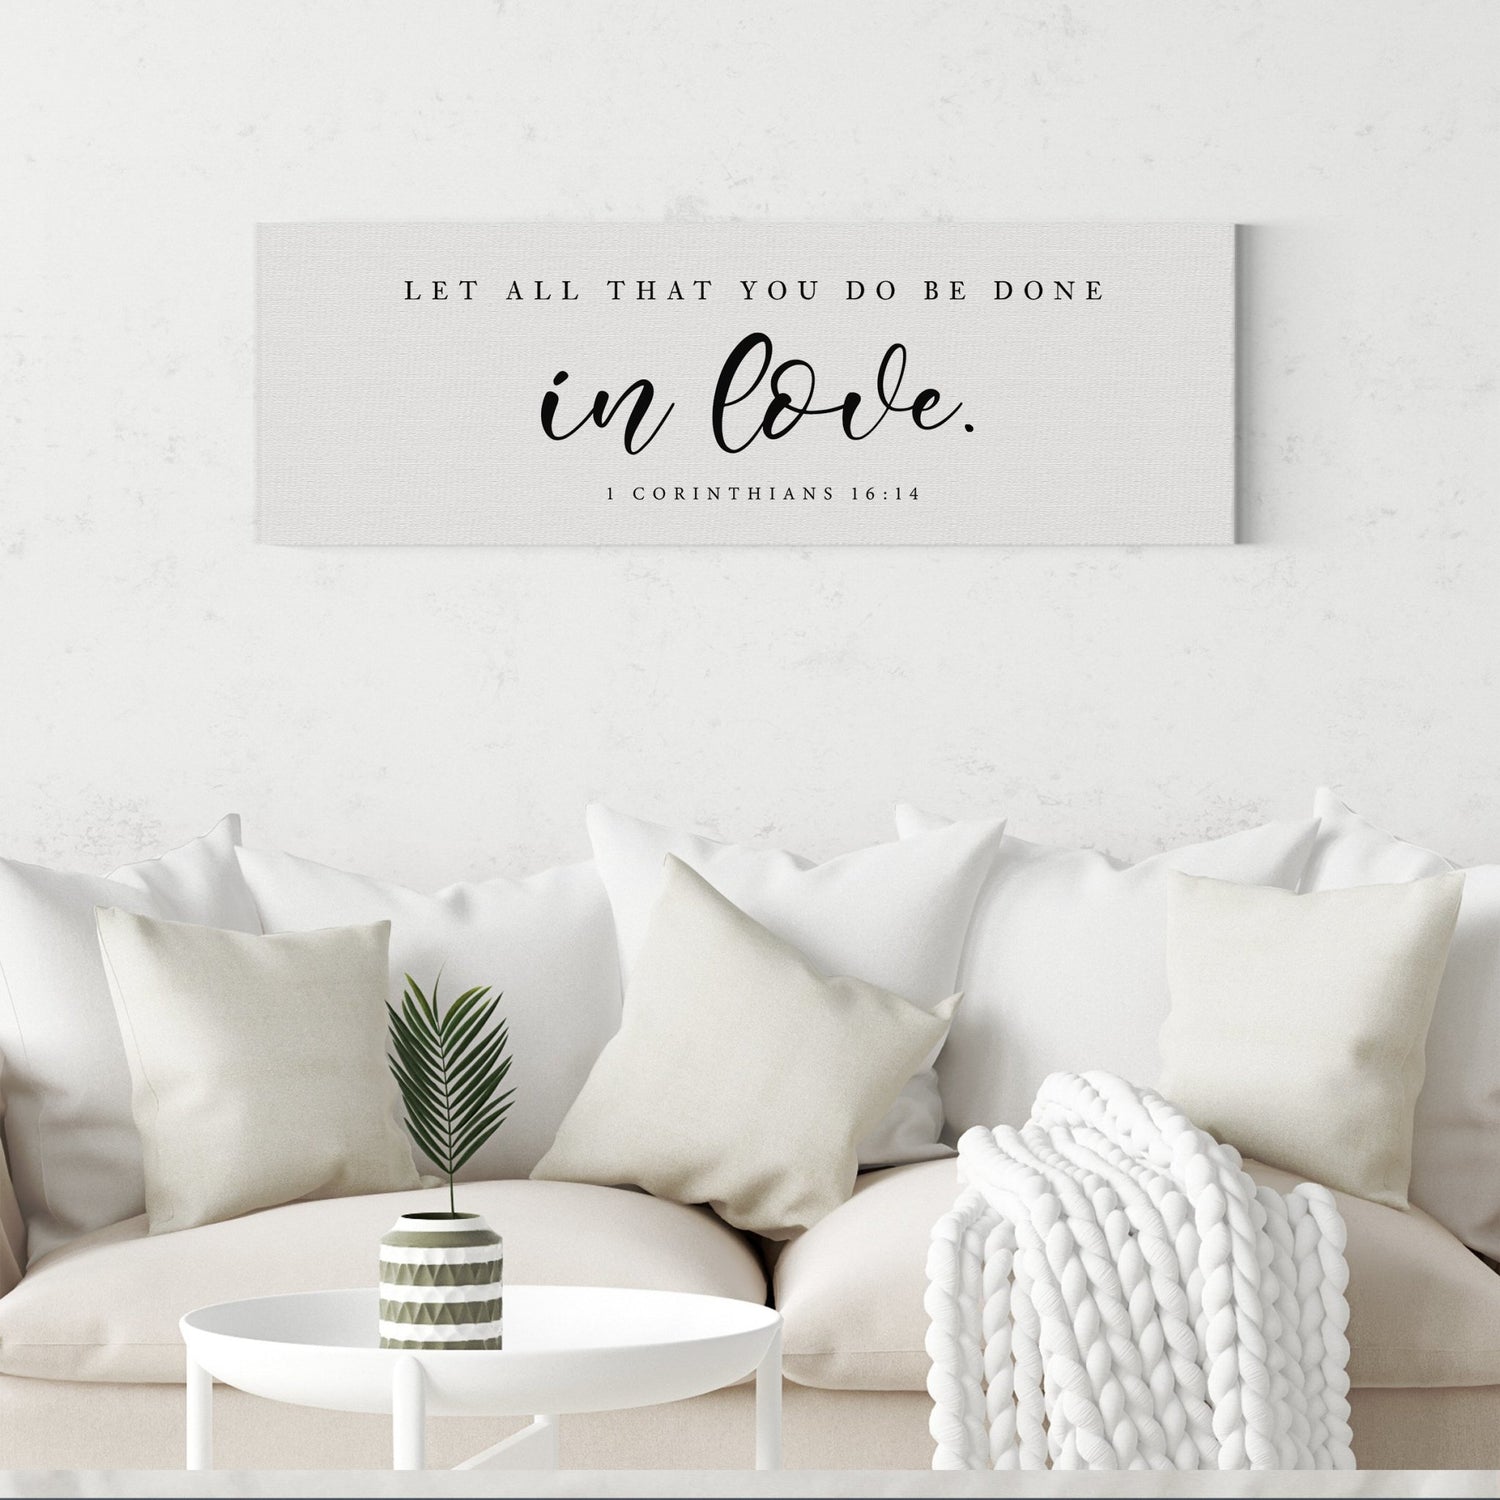 Let All That You Do Be Done In Love | 1 Corinthians 16:14 | Bible Verse Wall Art - Forever Written